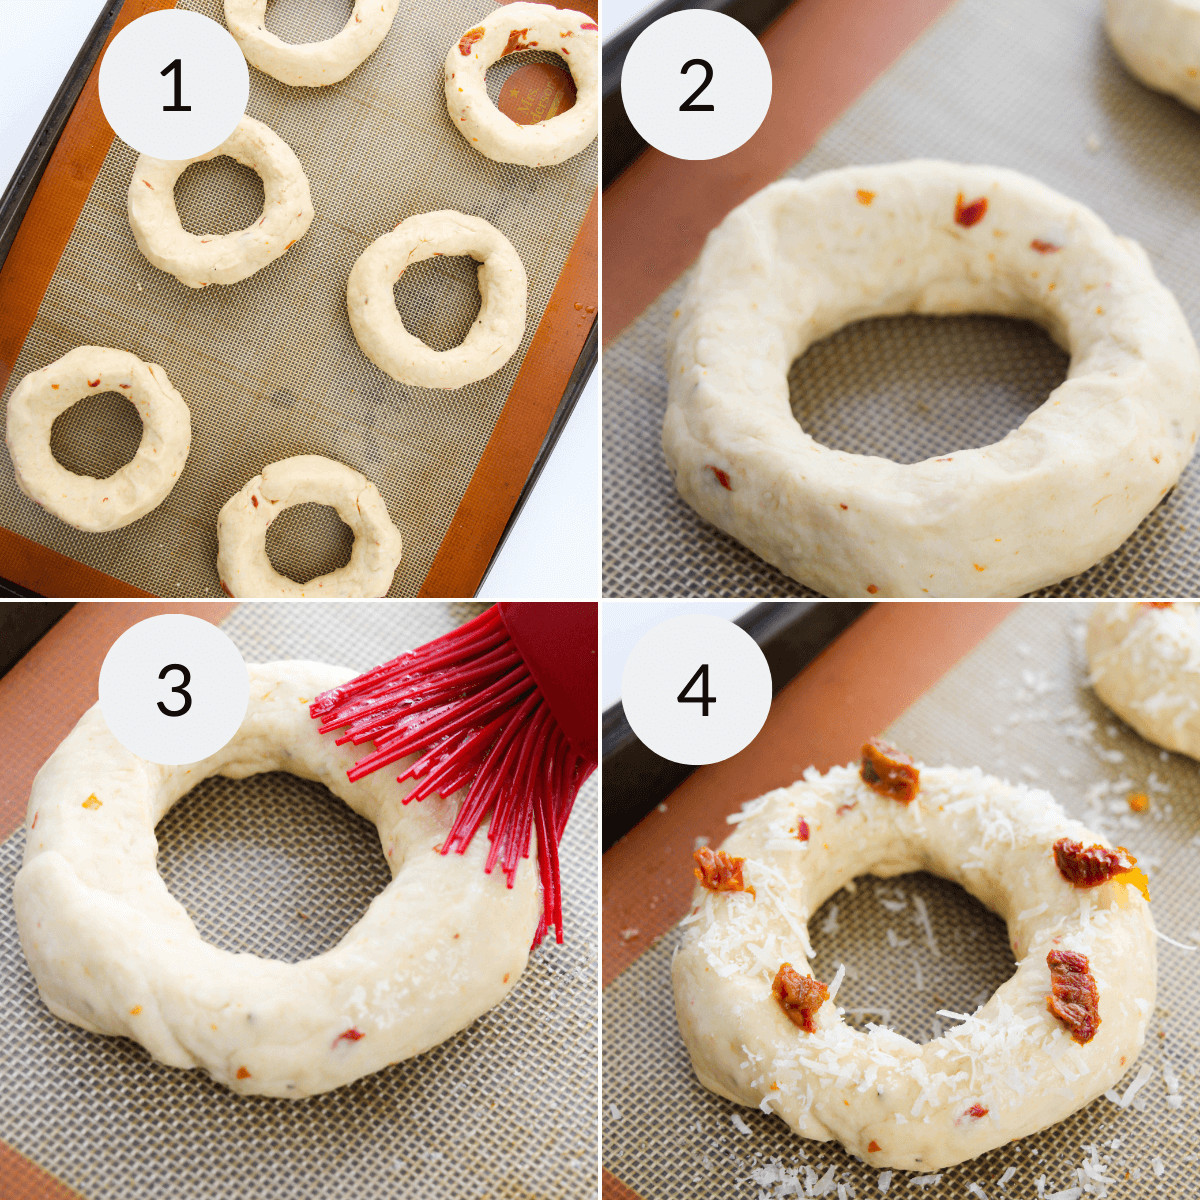 Step by step instructions for shaping the dough on a baking sheet.